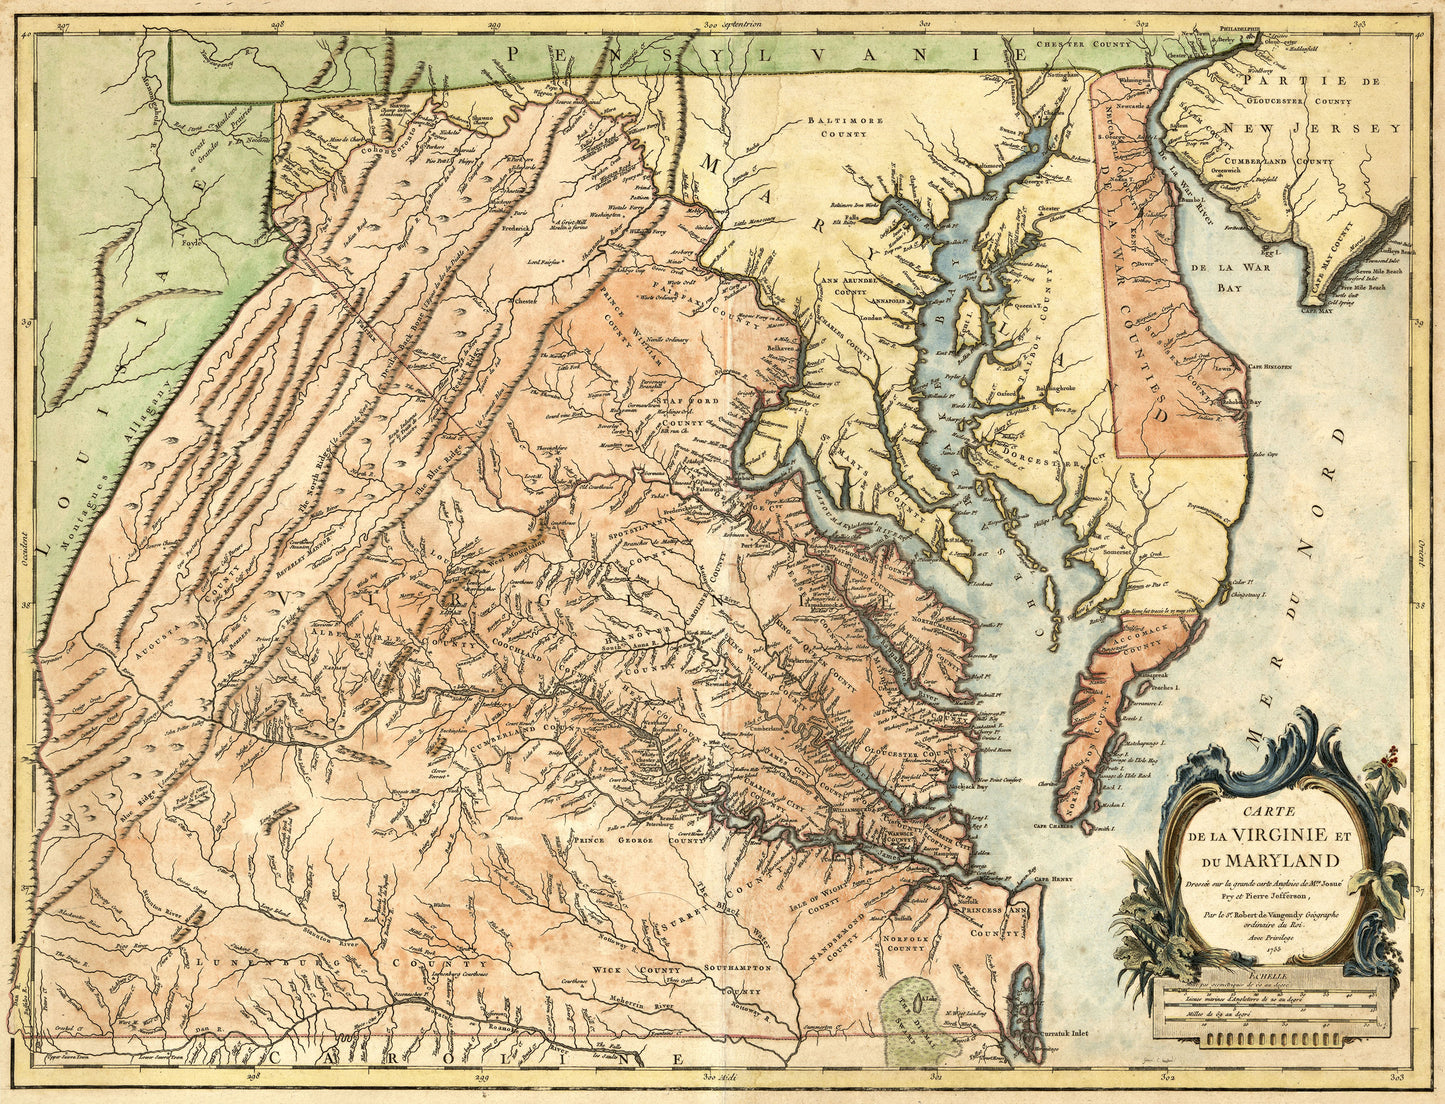 The "Carte de la Virginie et du Maryland" map was "Drawn on the great English Map by Mrs. Josue Fry and Pierre Jefferson, by Sr. Robert de Vaugondy, the King's ordinary geographer, with privilege."  This fine laminated print will come 30" wide by 23" high.